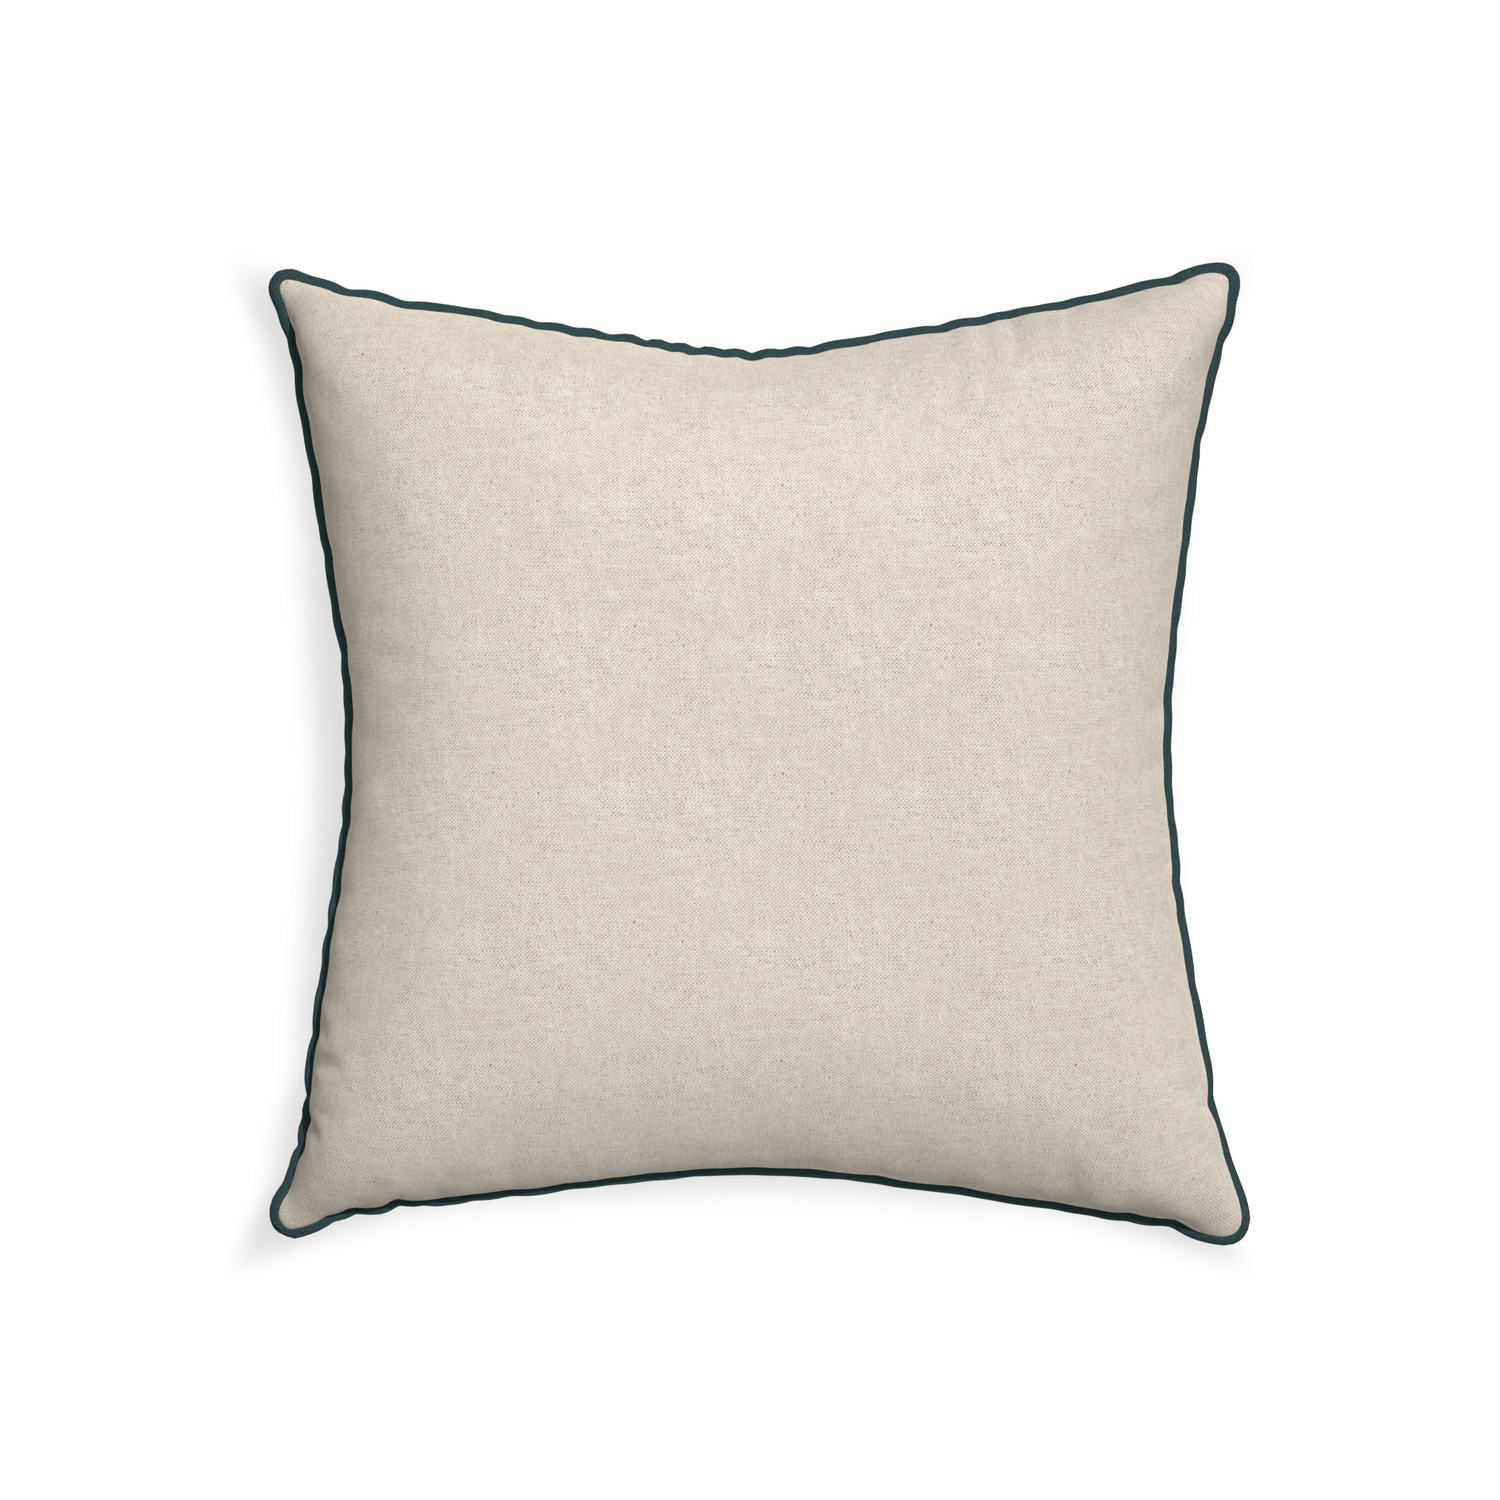 22-square oat custom light brownpillow with p piping on white background